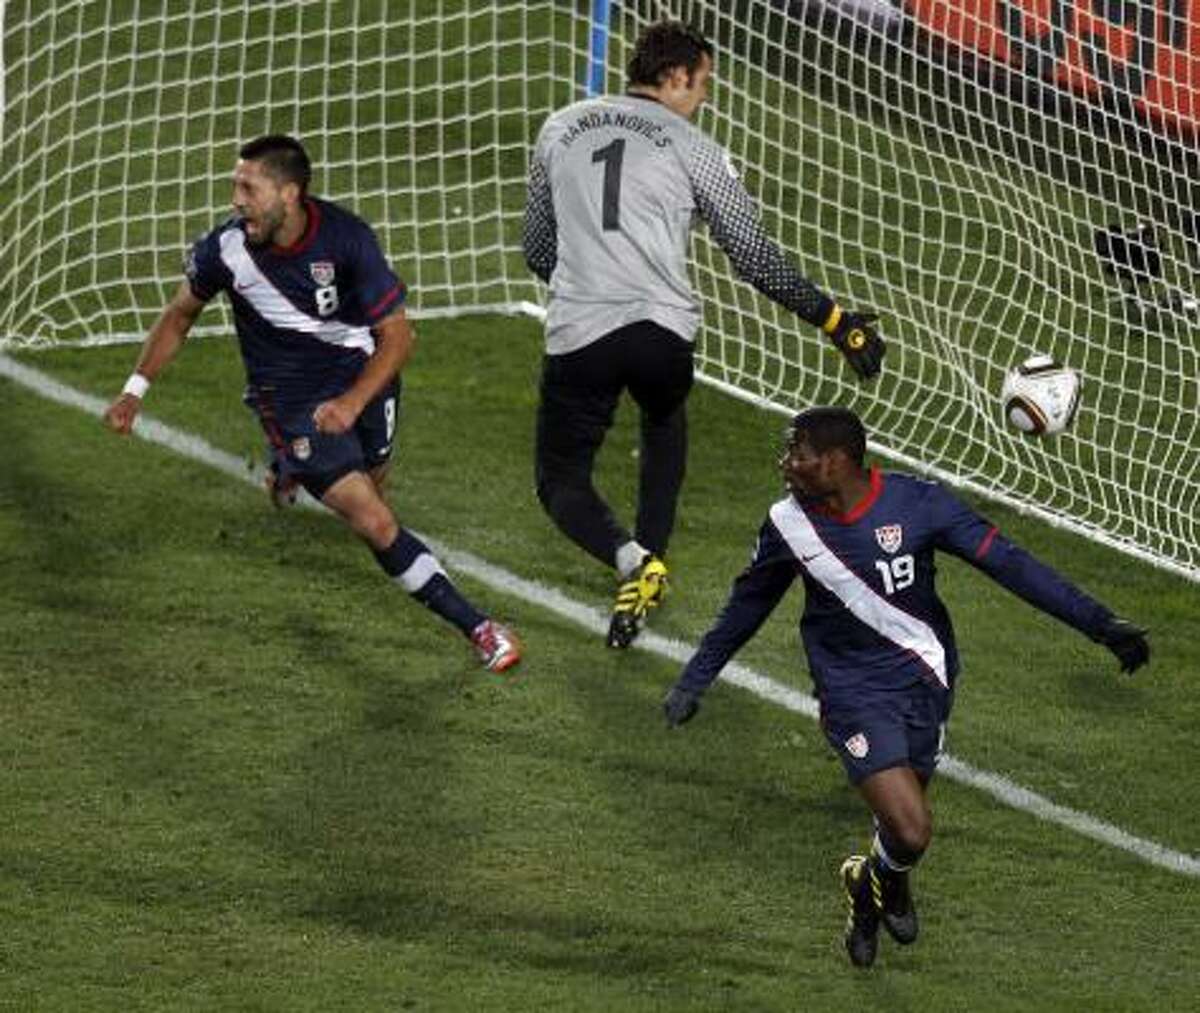 United States 2, Slovenia 2 Landon Donovan took a free kick from the side of the penalty area in the 85th minute. Maurice Edu, right, spun away and, one step into the 6-yard box, stuck out his left foot and put the ball in. But referee Koman Coulibaly had whistled play dead for a foul. He never explained who on the U.S. team did what.